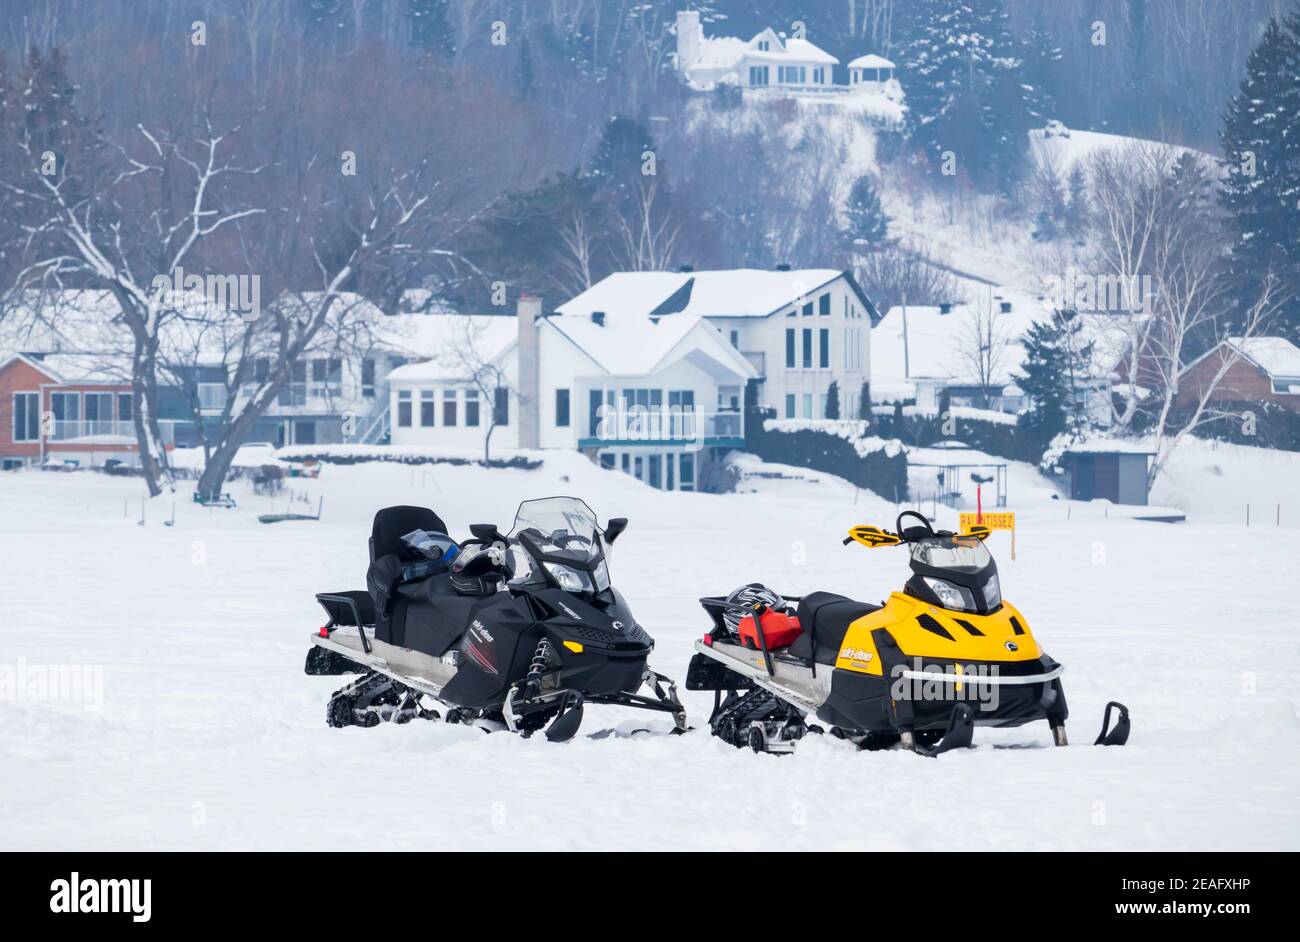 February 2, 2019- Grandes-Piles, Qc, Canada: Two snowmobiles parked on a frozen lake and houses in the background, Mauricie Stock Photo